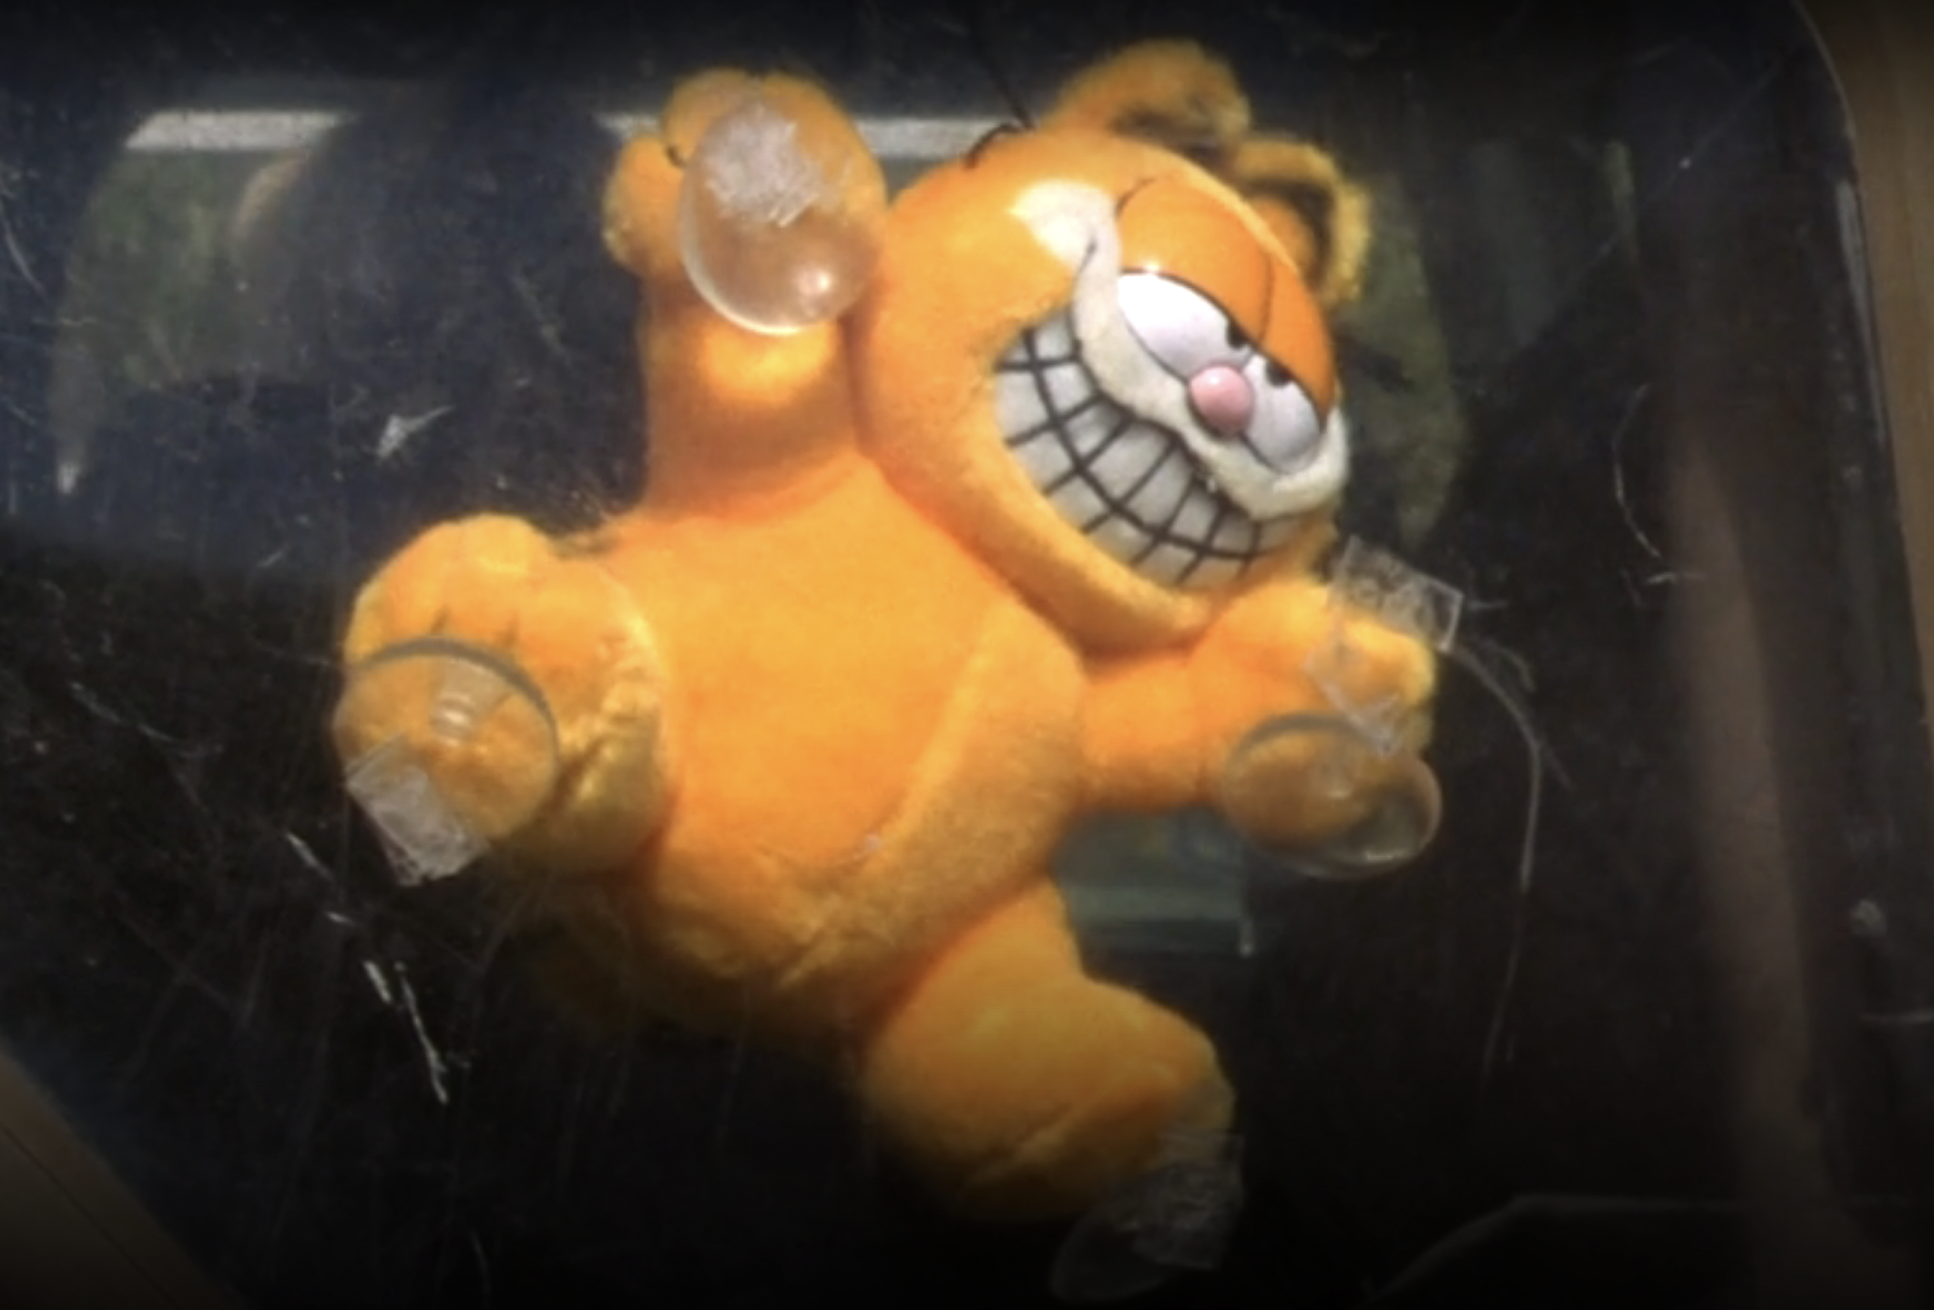 Screenshot from S1E20 of Veronica Mars. A grinning Garfield stuffed animal is stuck by suction cups to a car window.